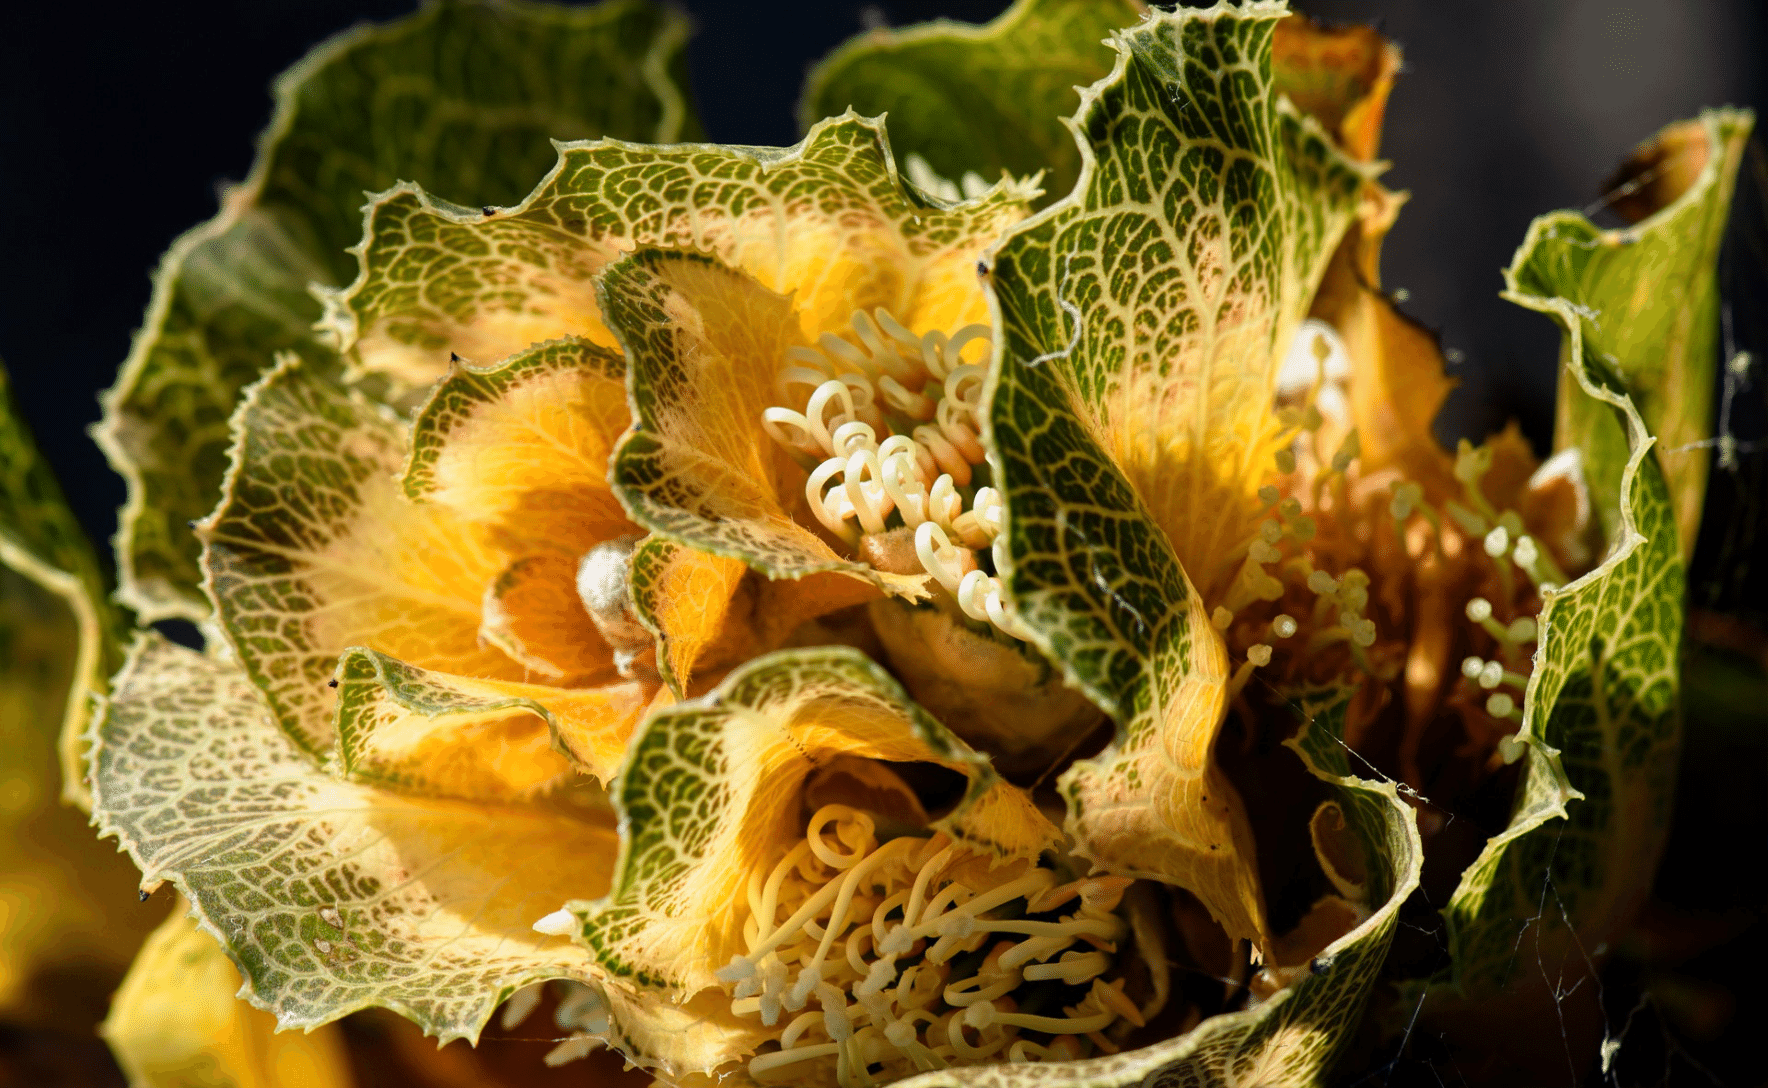 A photo of a green and yellow plant, its leaves have a ruffled cabbage-like texture.